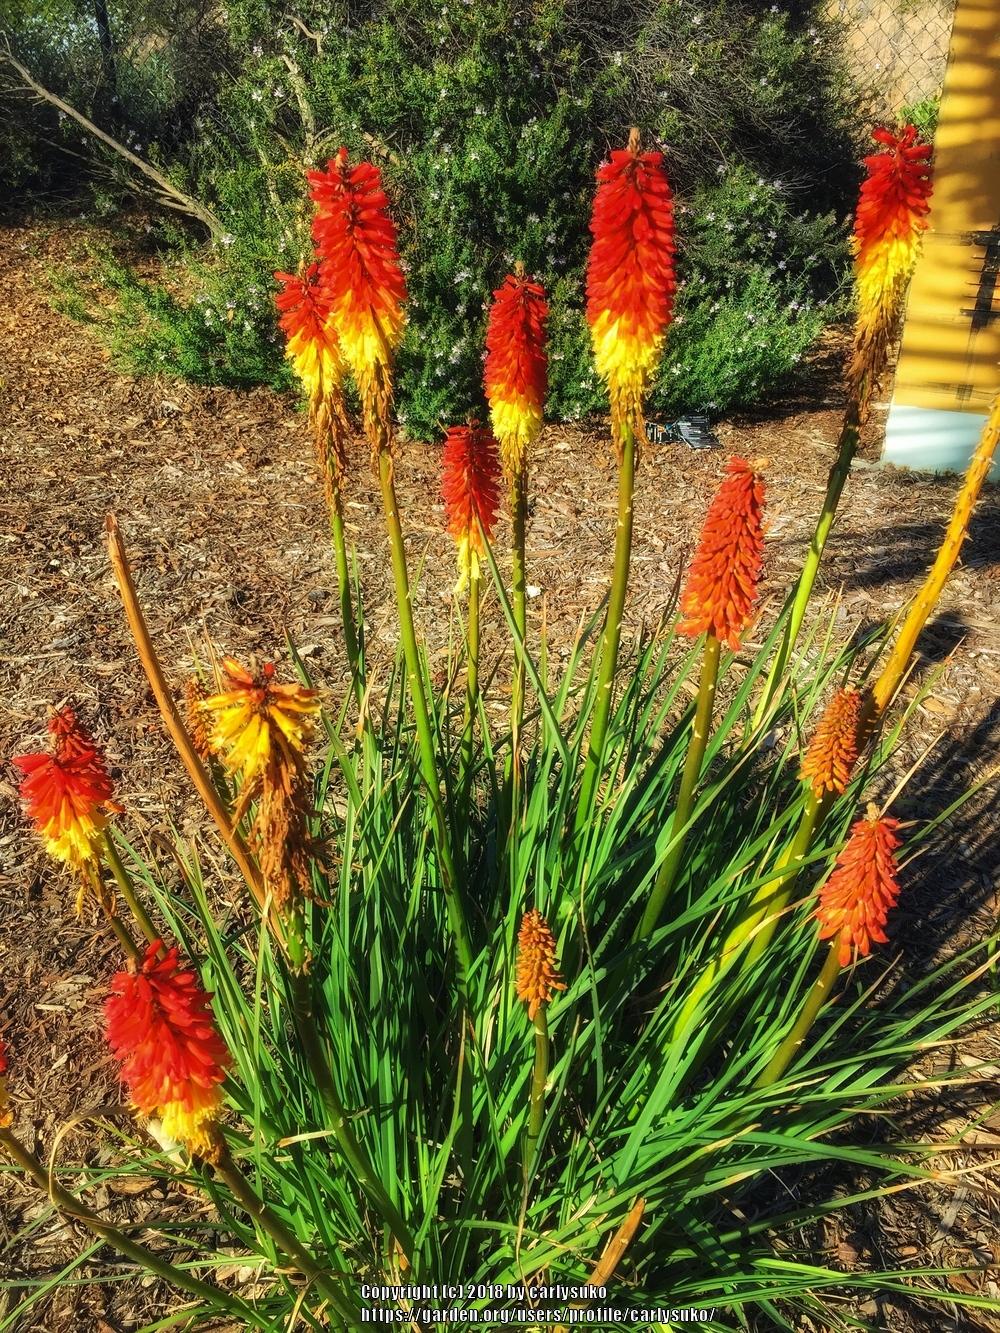 Photo of Torch Lilies (Kniphofia) uploaded by carlysuko